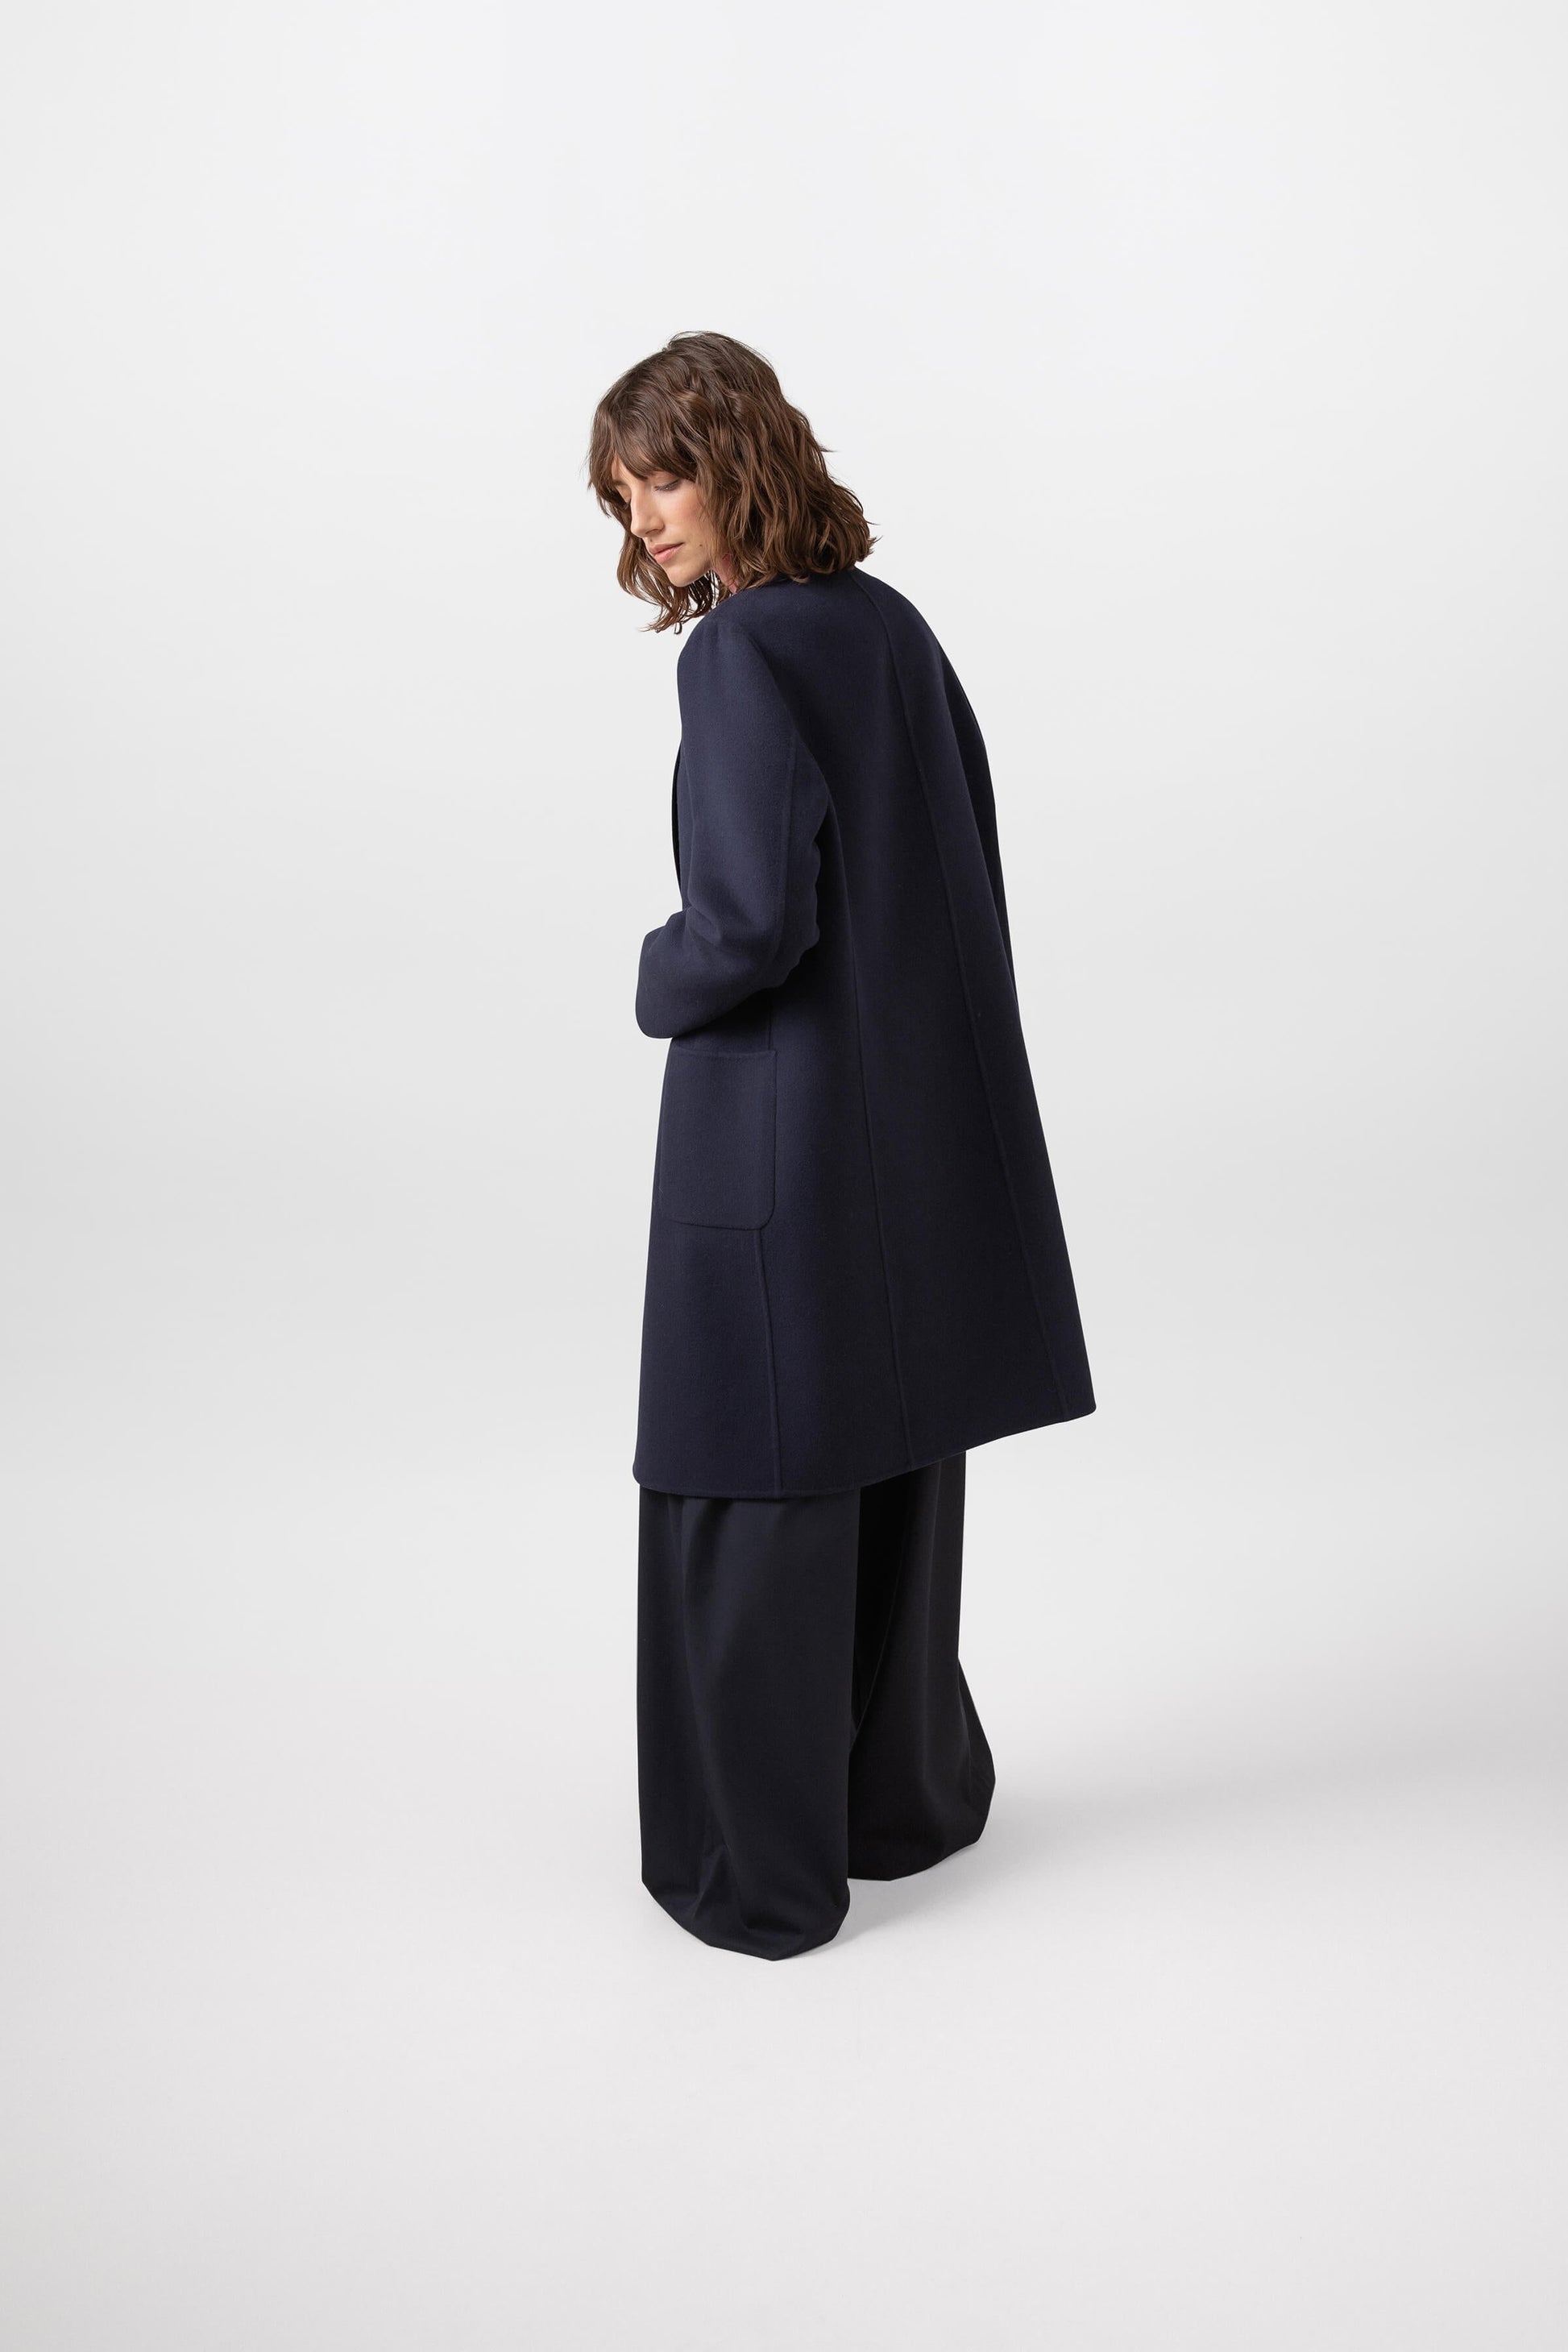 Johnstons of Elgin Women's Cashmere Crombie Coat in Navy worn with a Sea Pink Merino Roll Neck on a white background TA000520RU7291